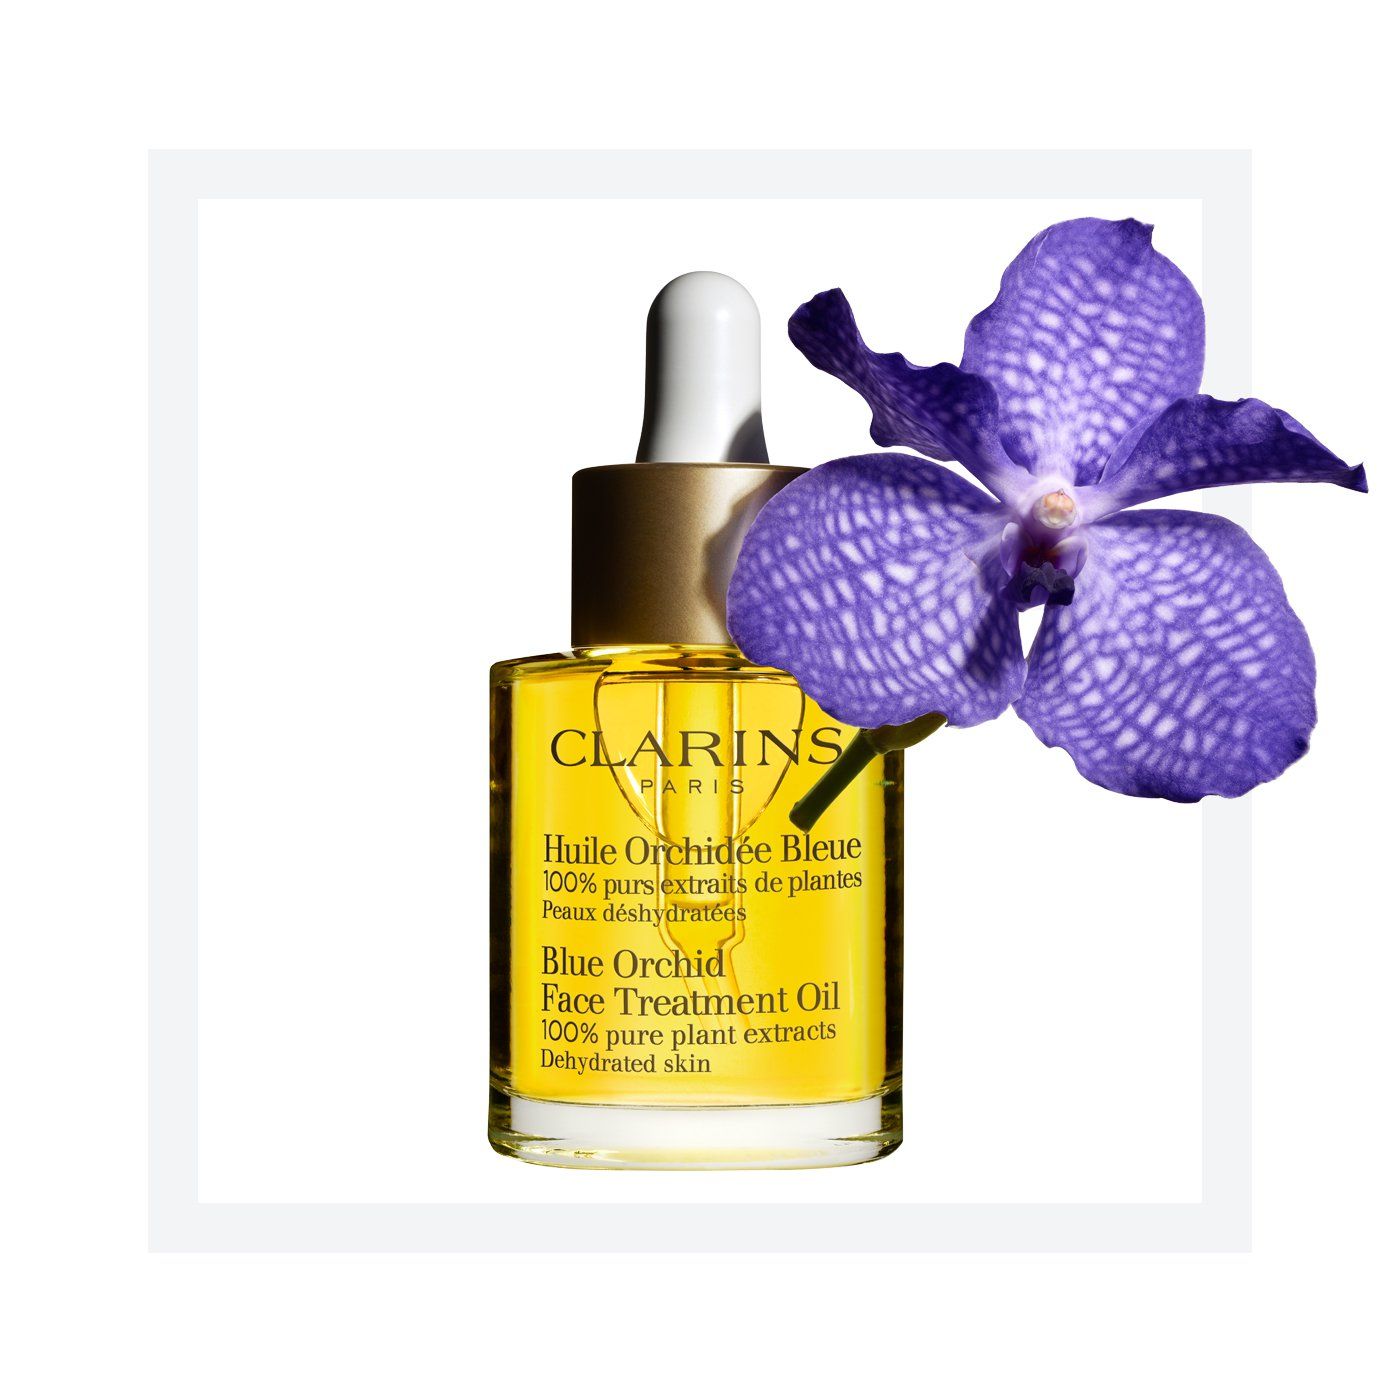 Why is a bottle of Clarins beauty oil sold every 21 seconds worldwide?